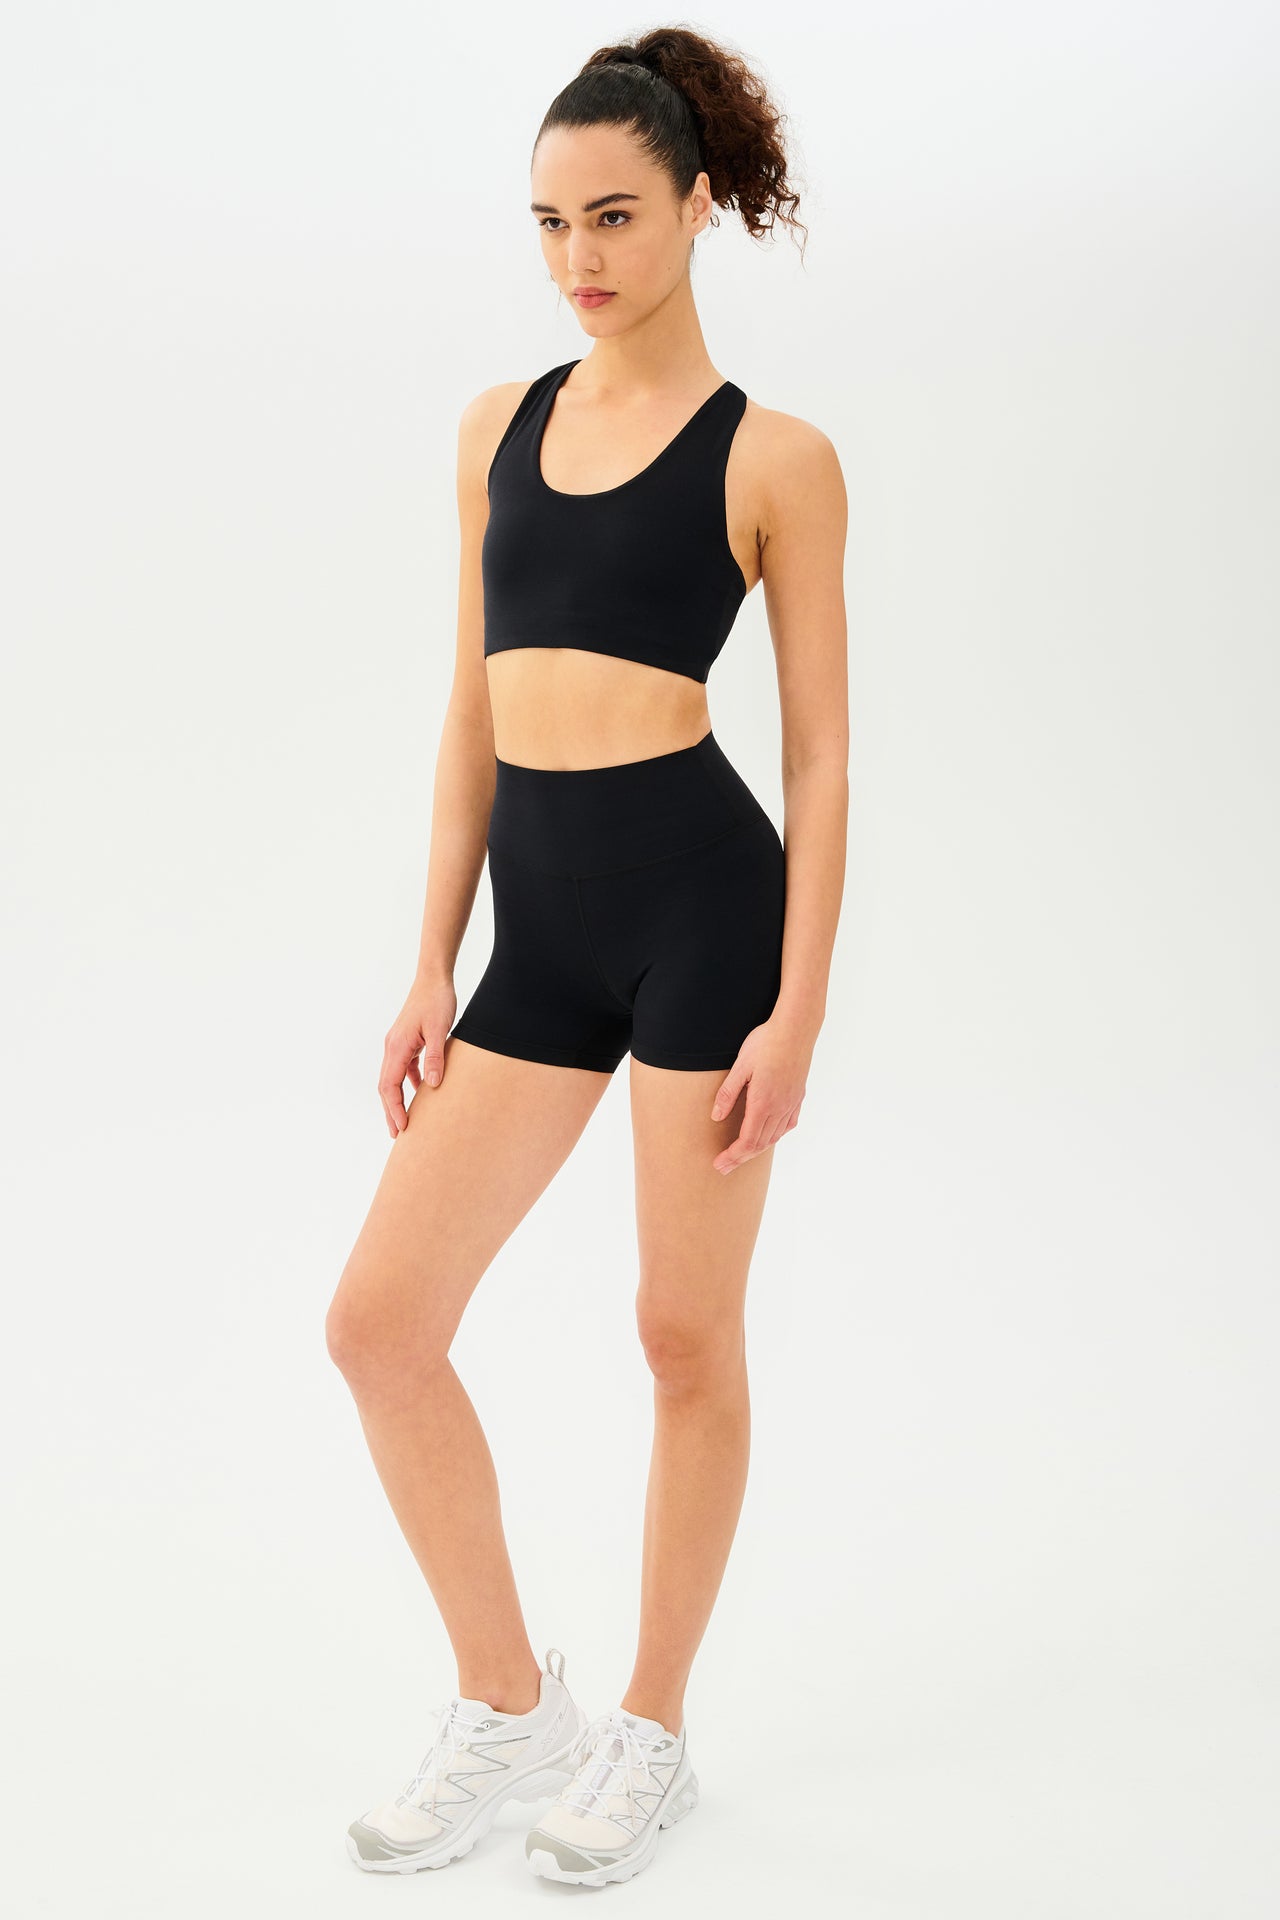 Full side view of girl wearing black shorts with black sports bra and white shoes